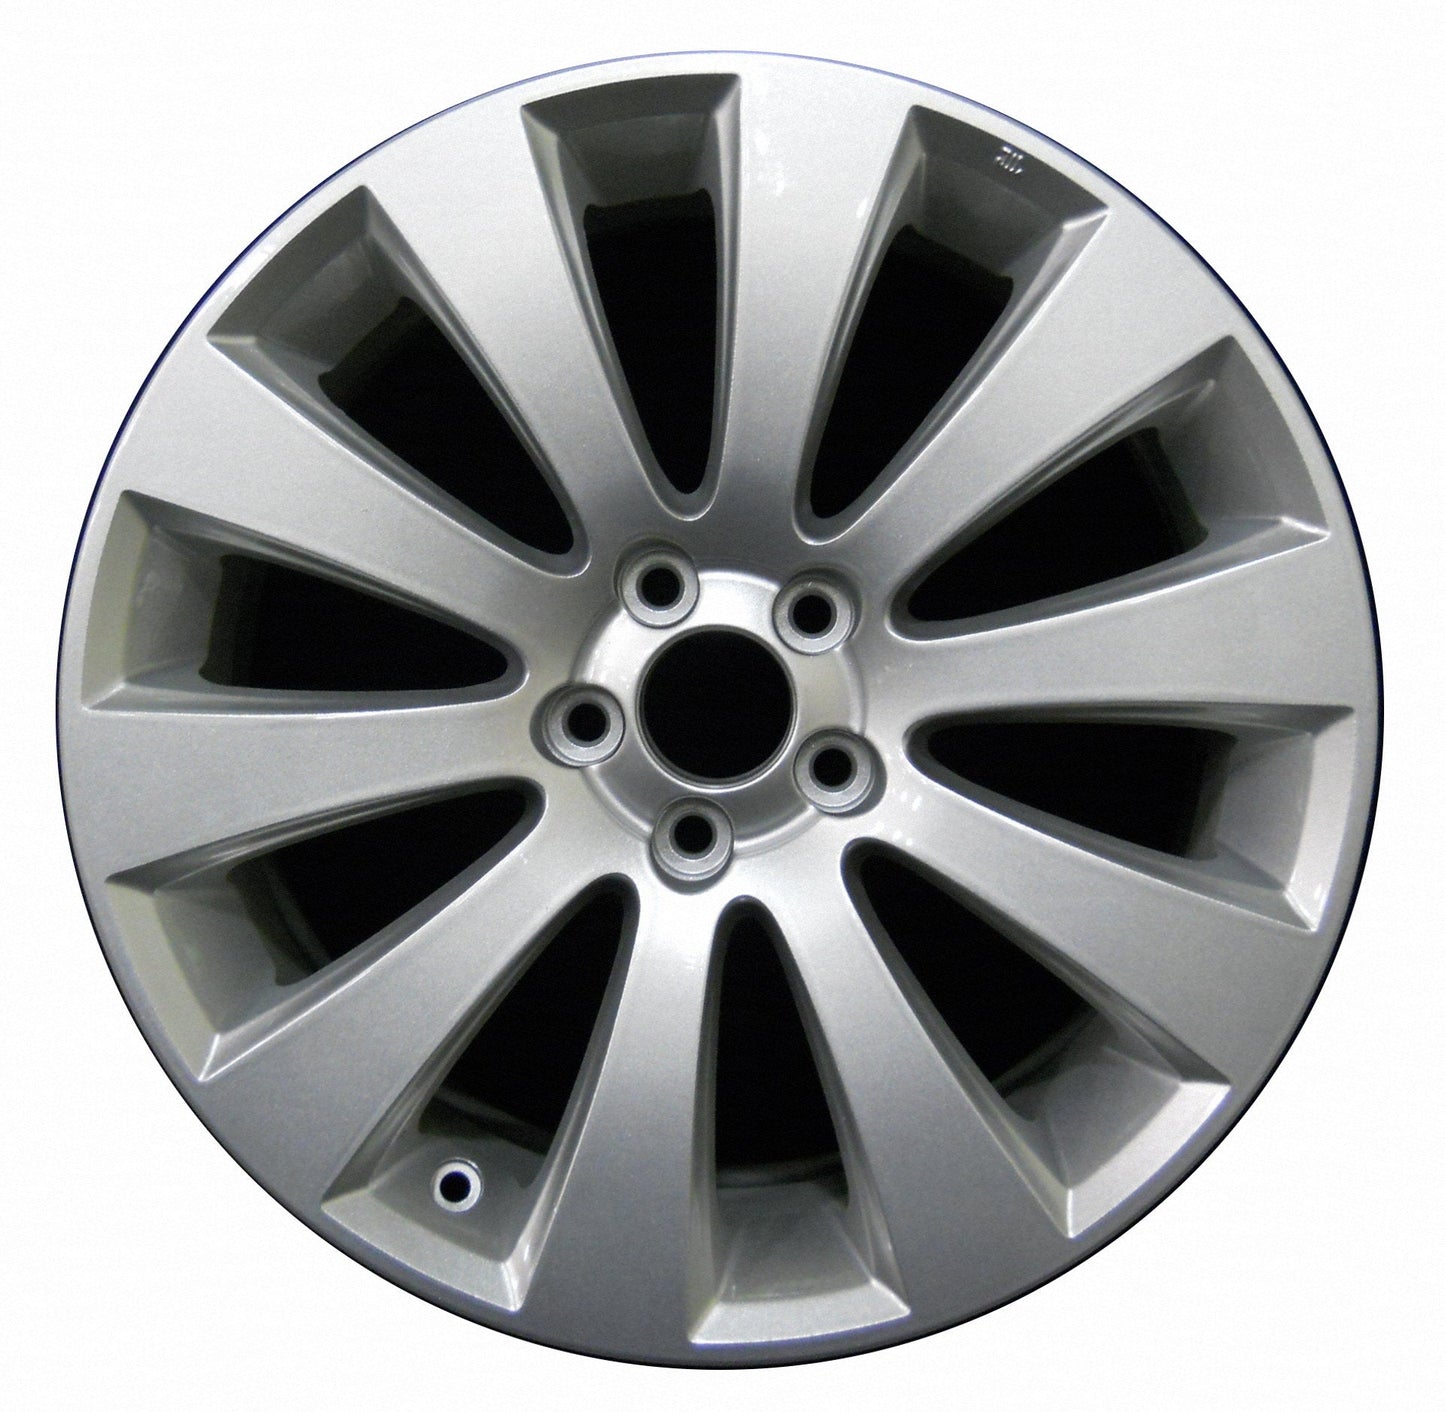 Subaru Forester  2009, 2010, 2011, 2012 Factory OEM Car Wheel Size 17x7.5 Alloy WAO.68786.PS08.FF